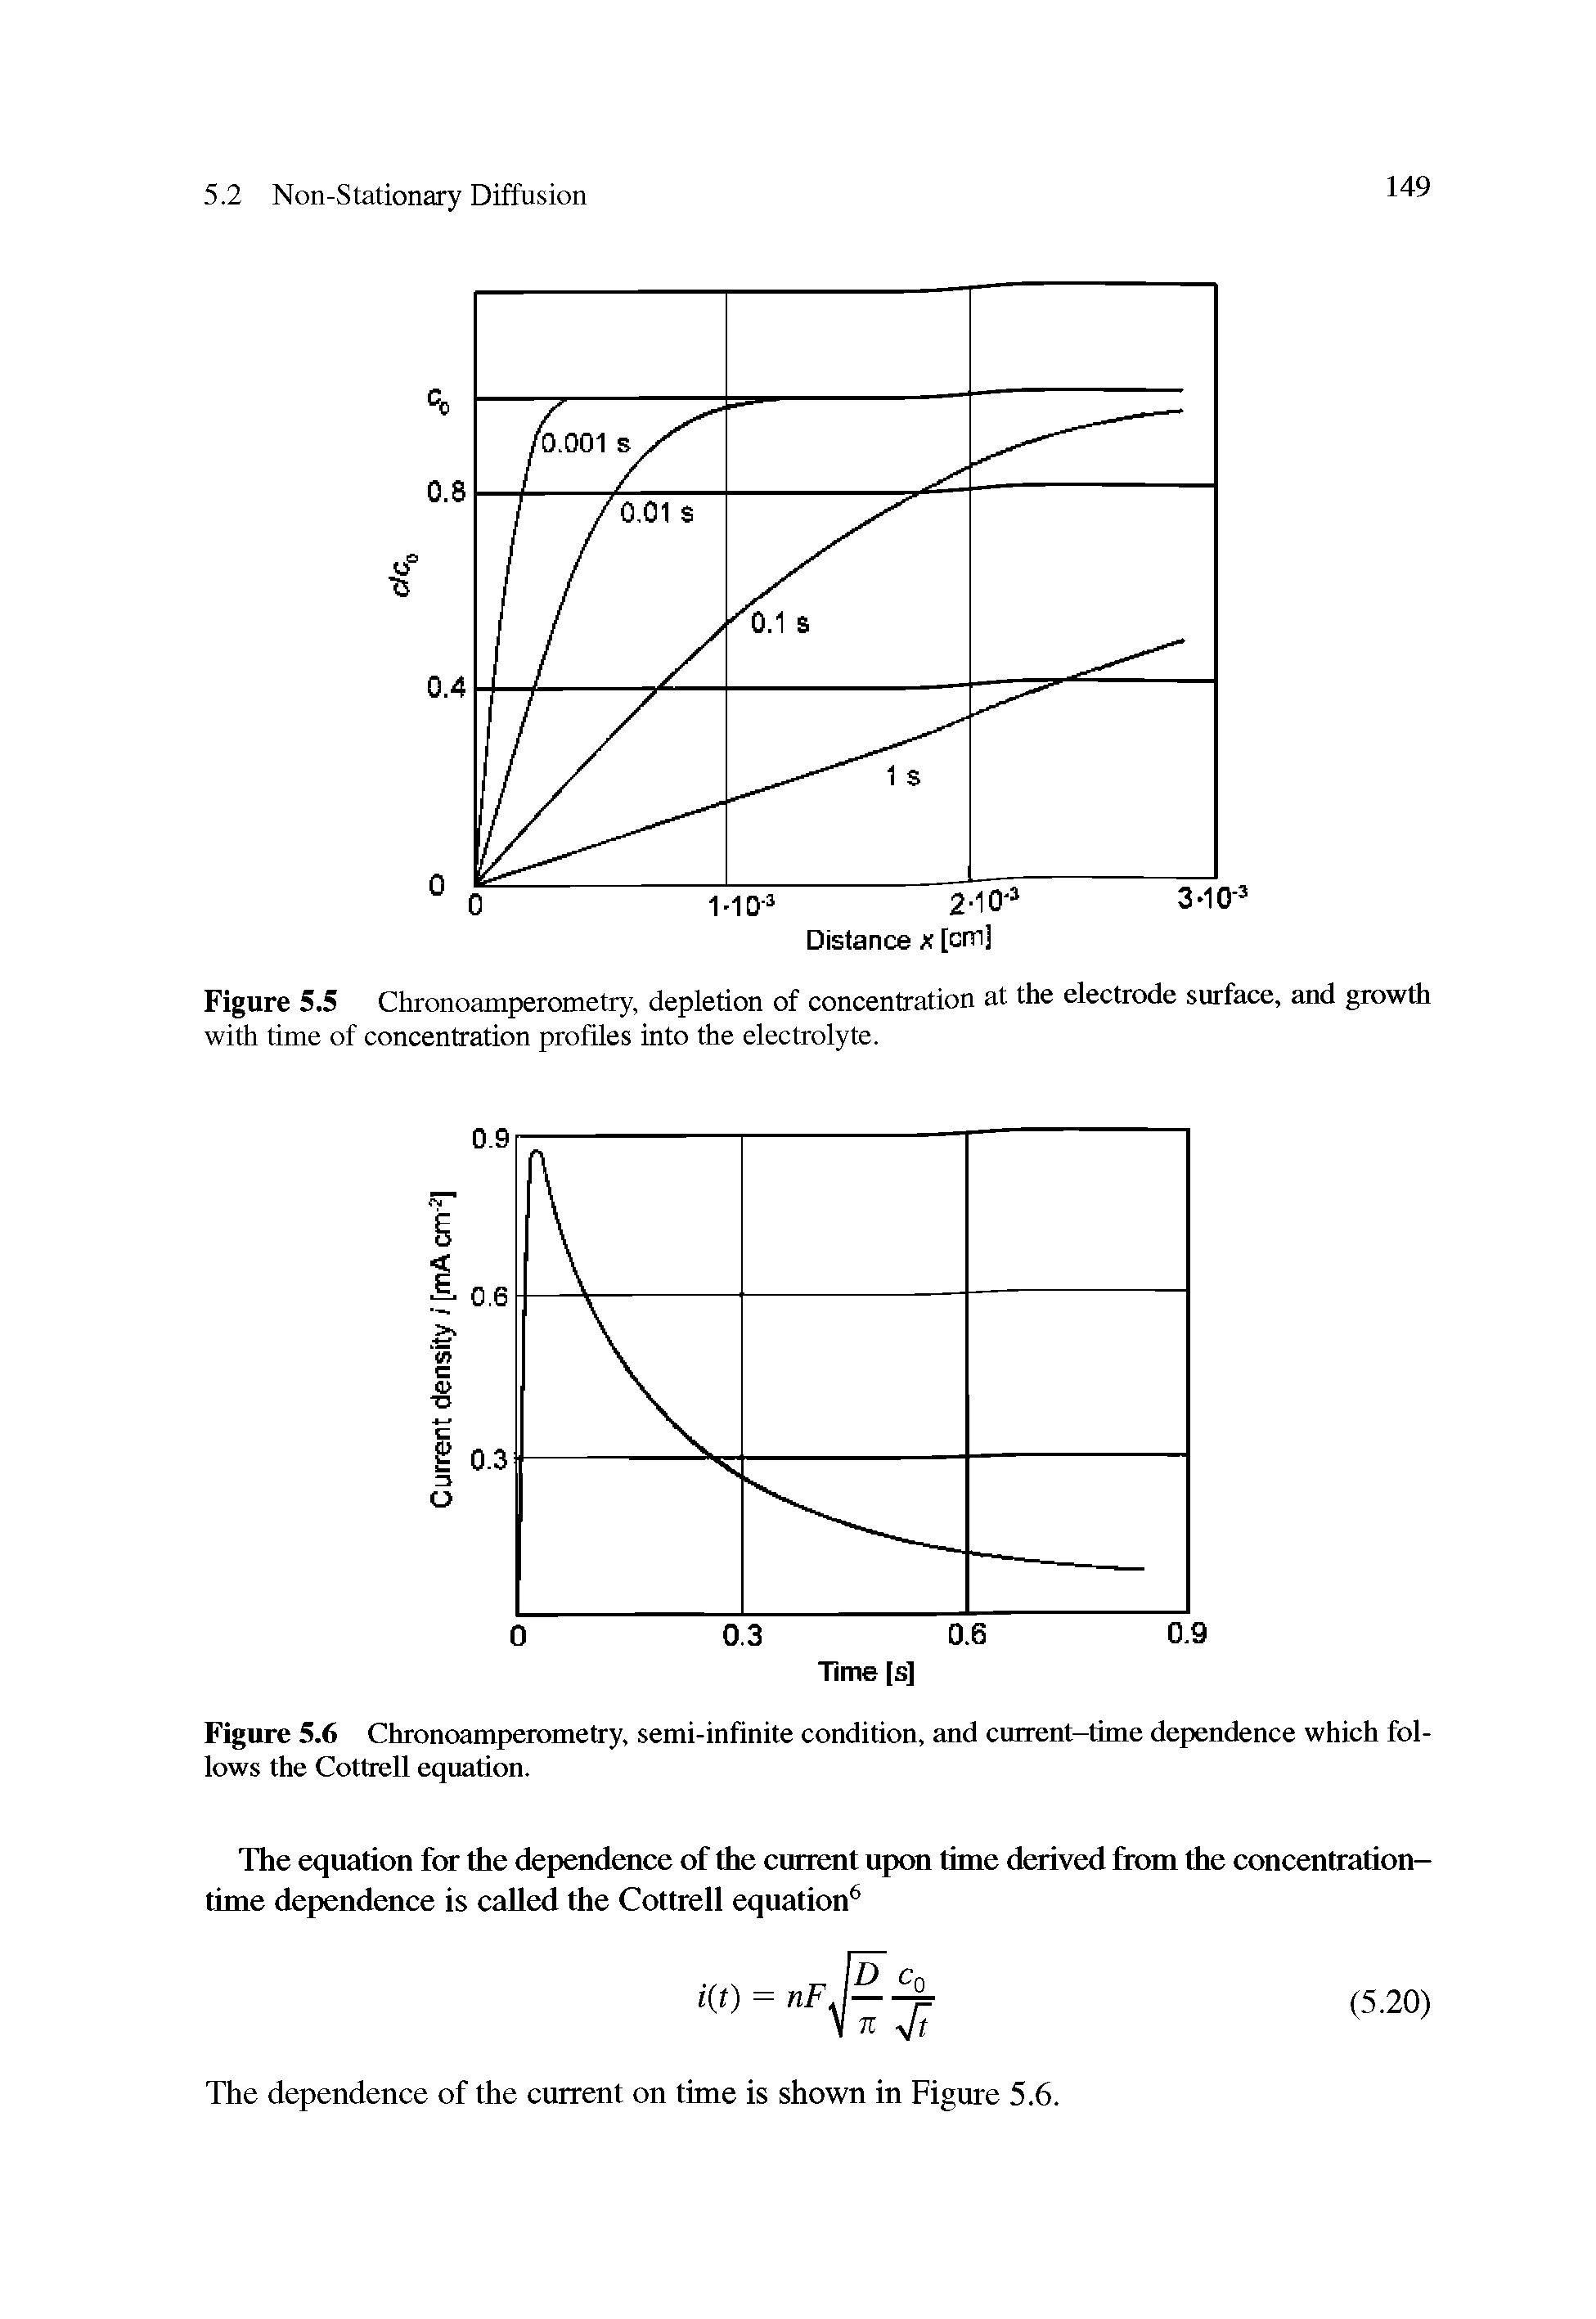 Figure 5.5 Chronoamperometry, depletion of concentration at the electrode surface, and growth with time of concentration profiles into the electrolyte.